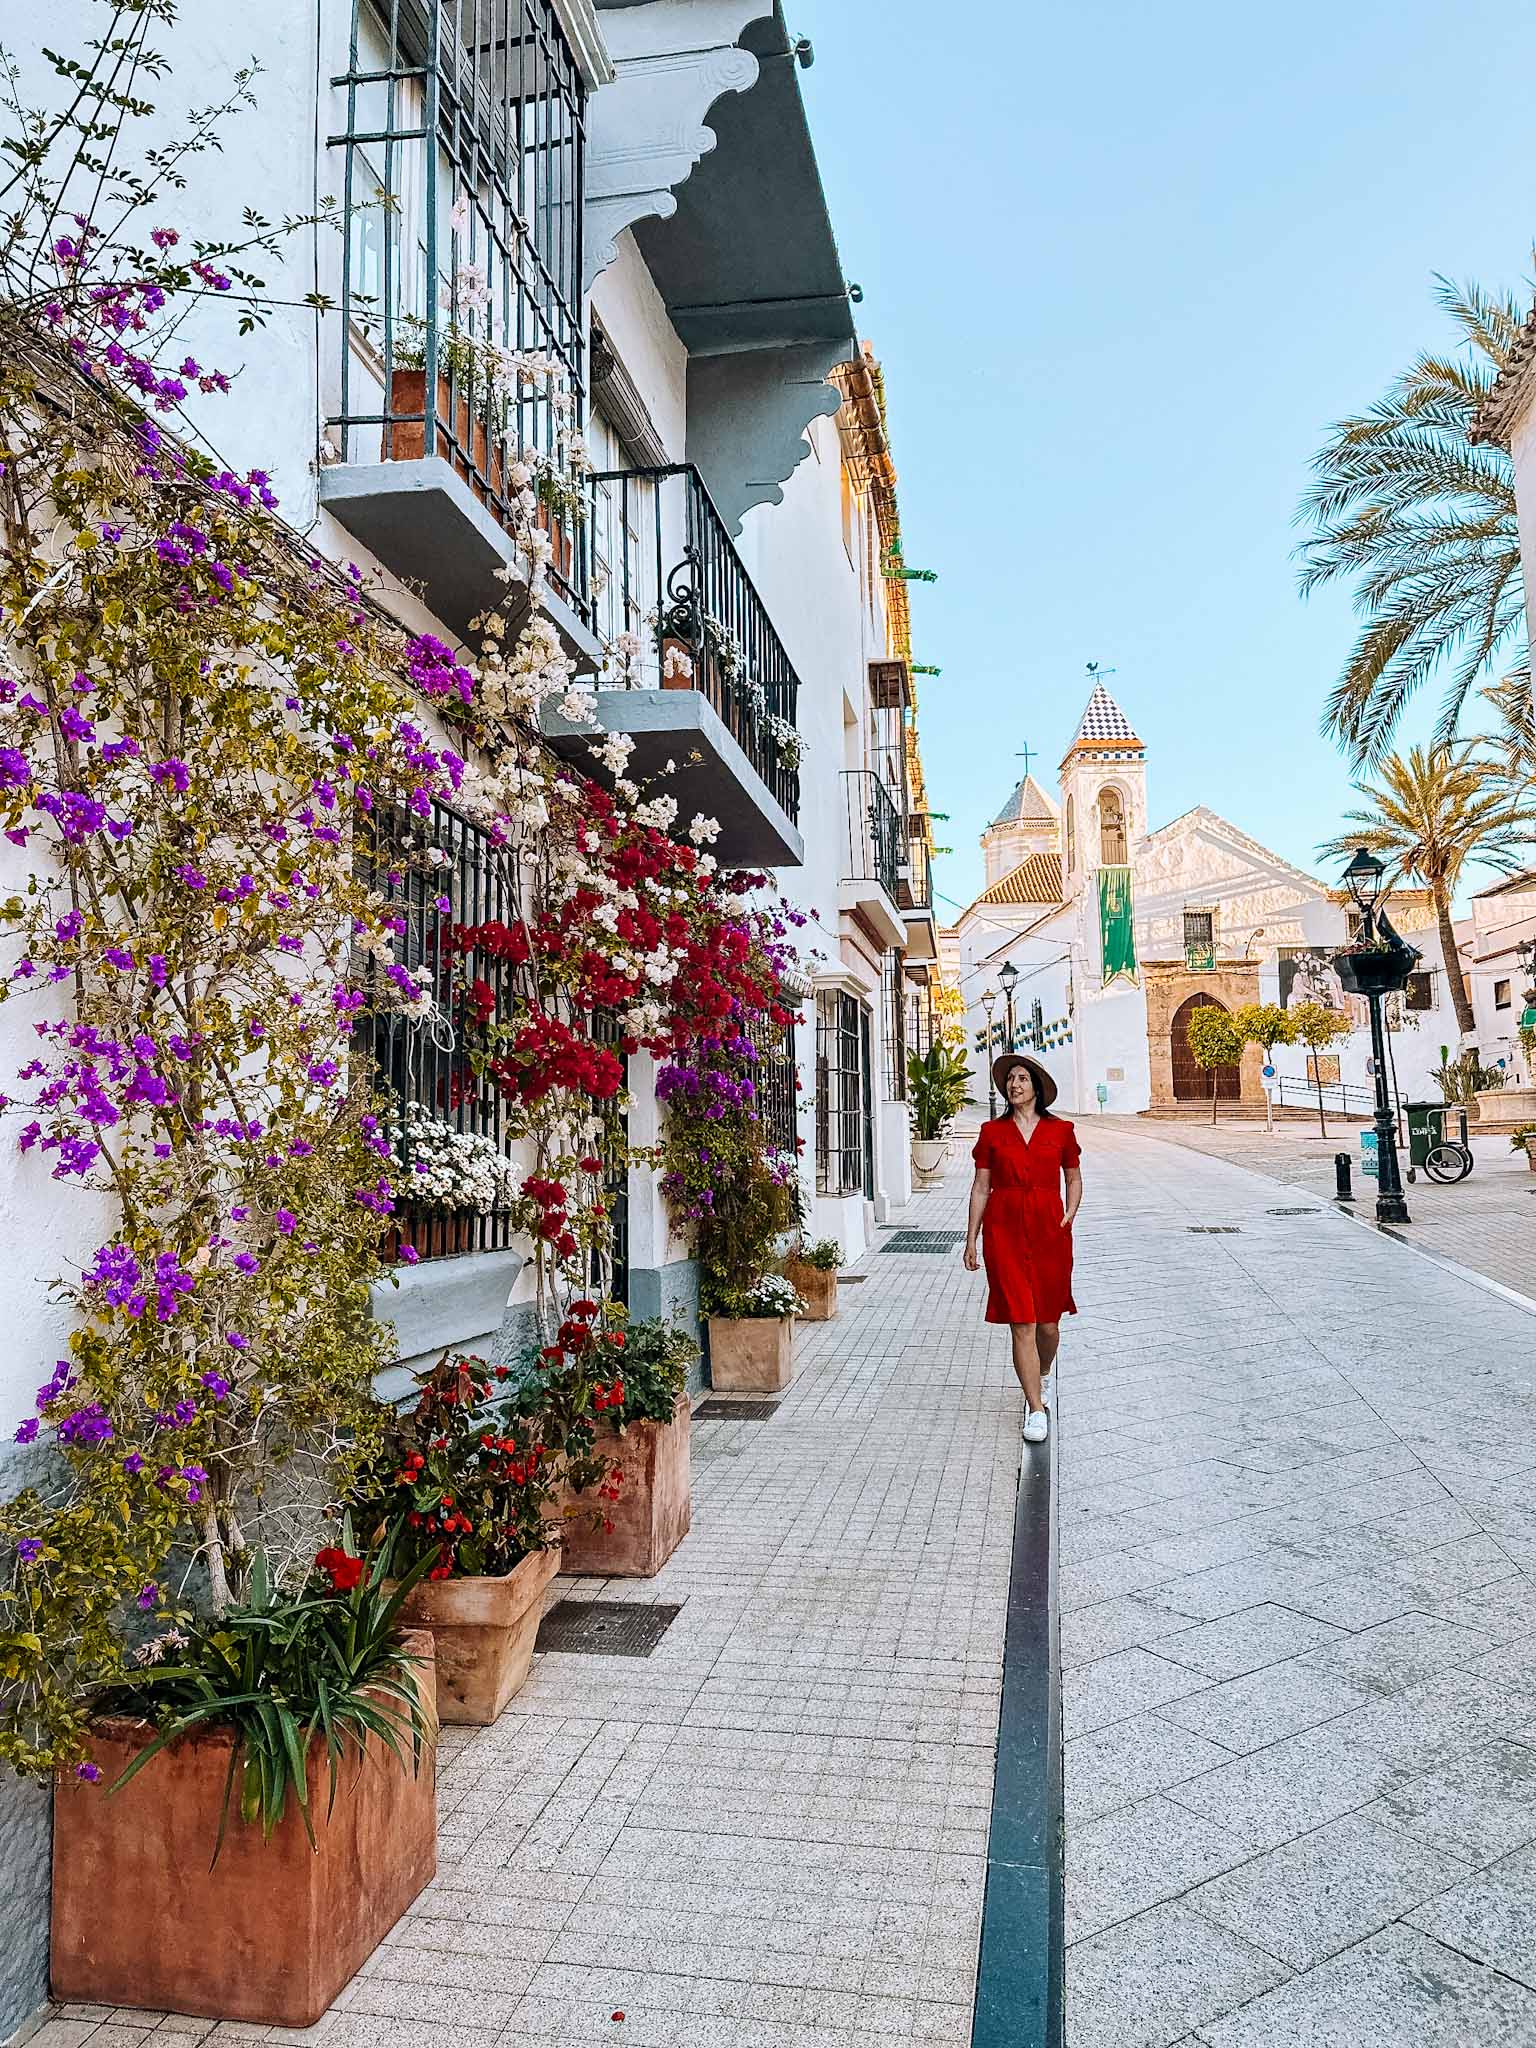 Most beautiful streets in Marbella, Spain - Calle Ancha